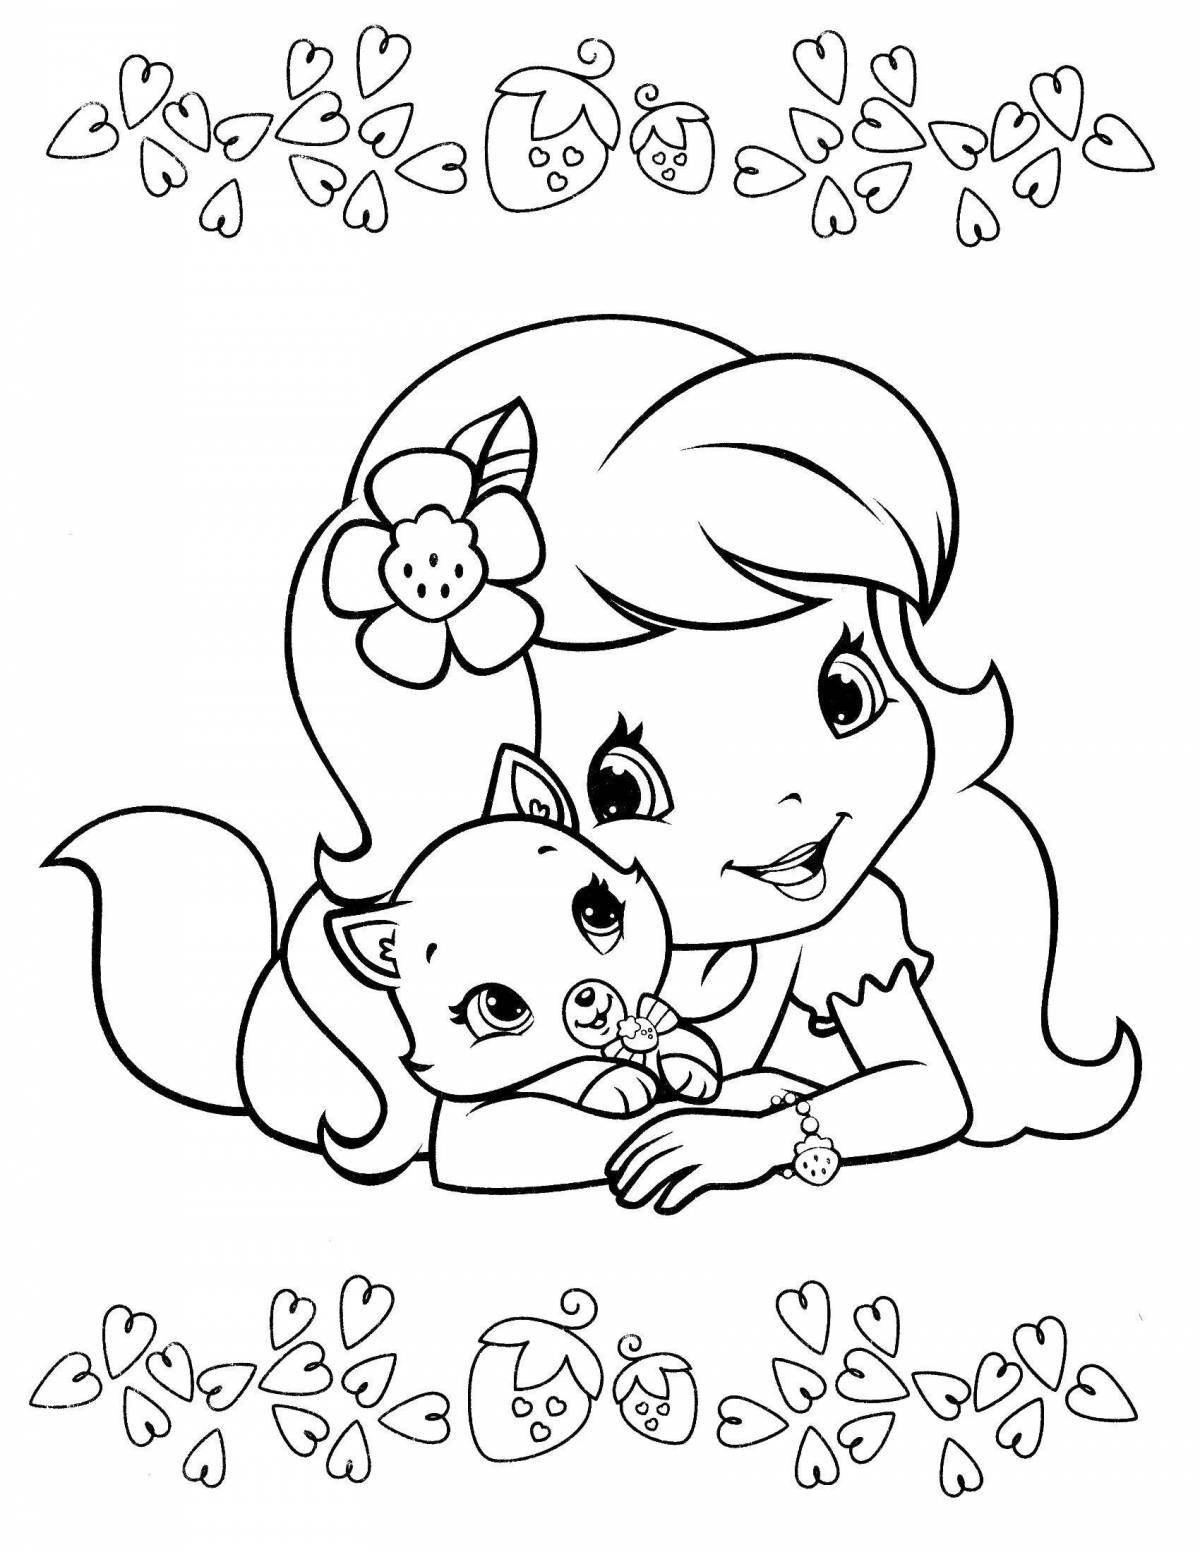 Amazing coloring pages without download